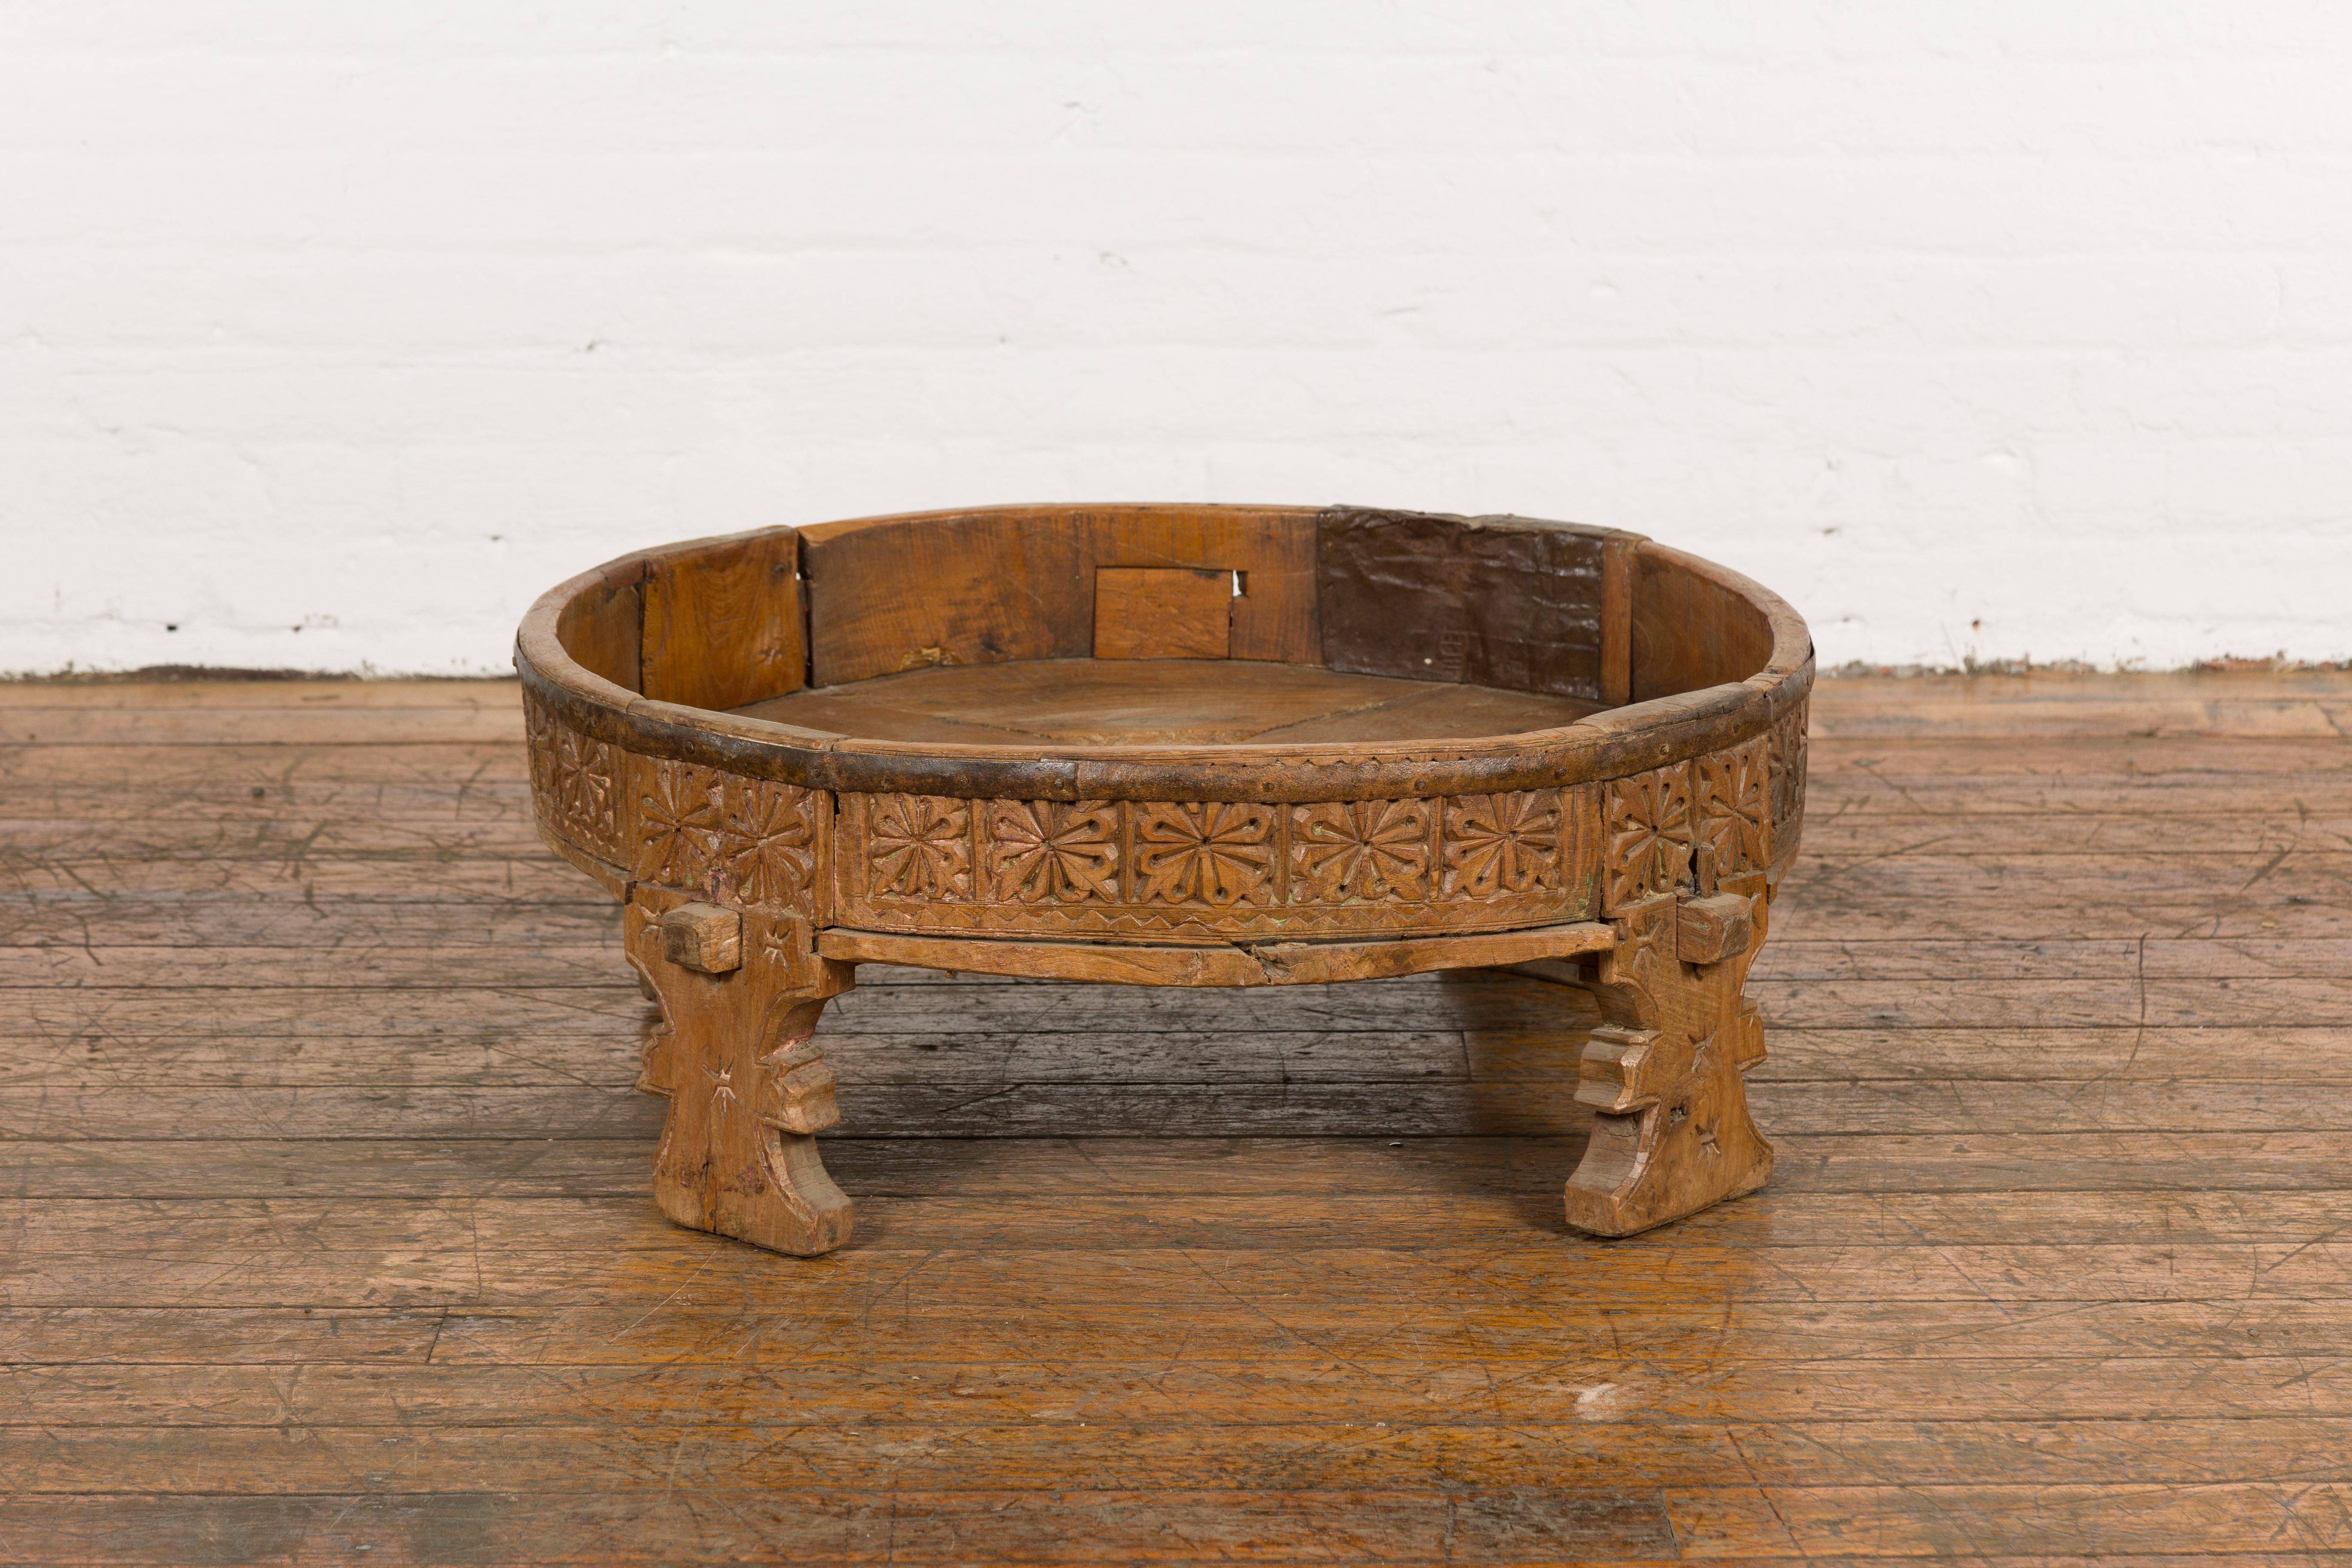 A Tribal Indian rustic teak wood Chakki grinder table from the 1920s with hand-carved geometric motifs, pierced center, carved feet and weathered patina. Step into the charm of traditional Indian craftsmanship with this 1920s tribal rustic teak wood